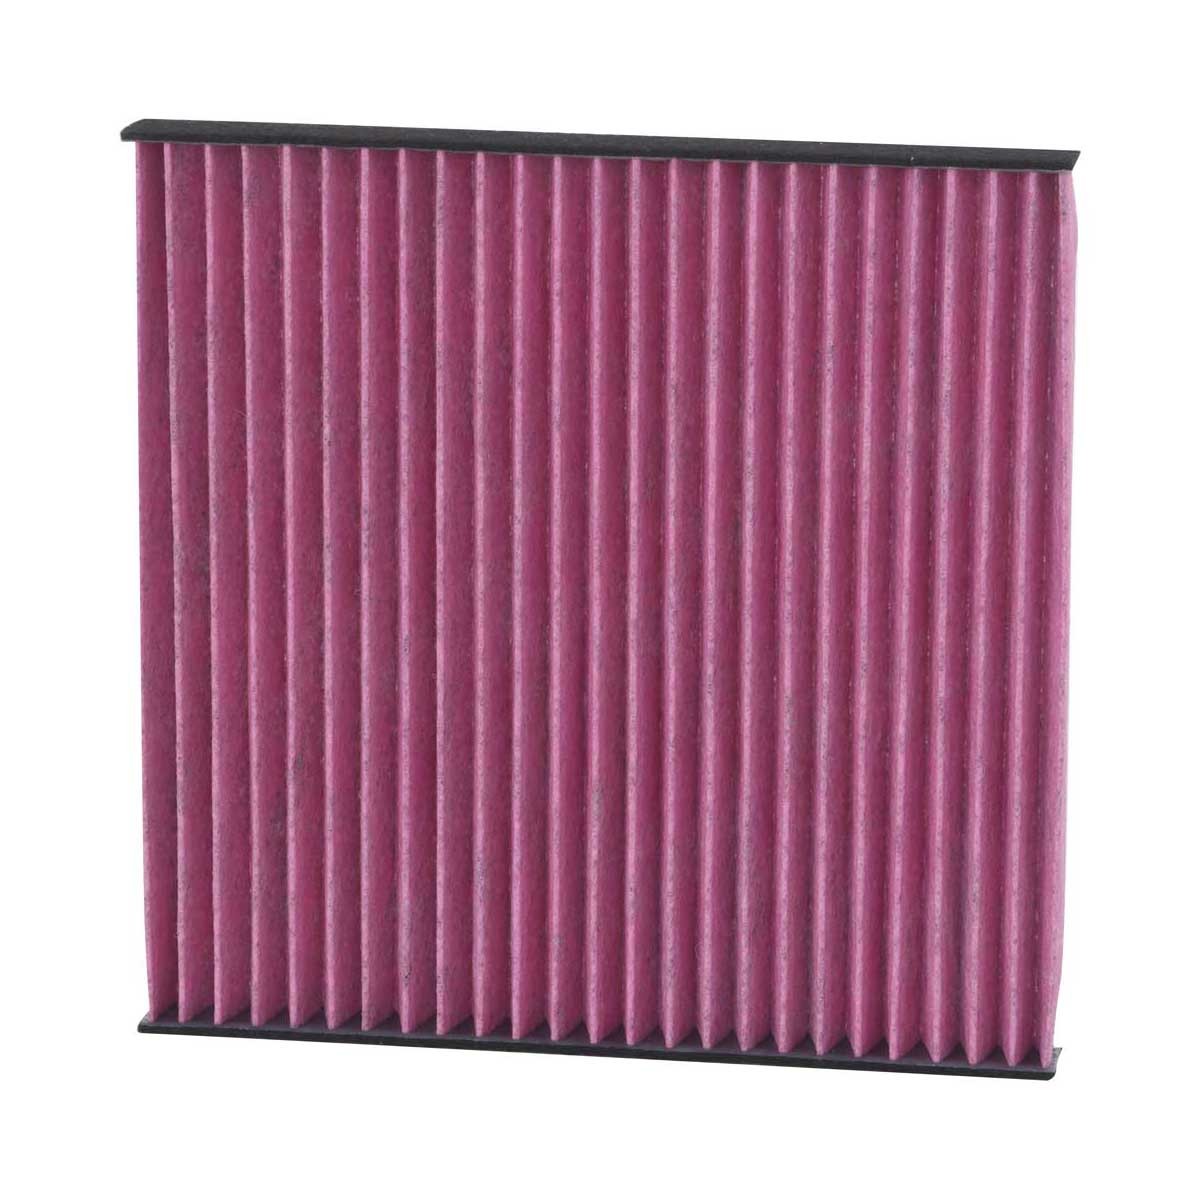 K&N Filters DVF5045 Pollen filter LEXUS experience and price